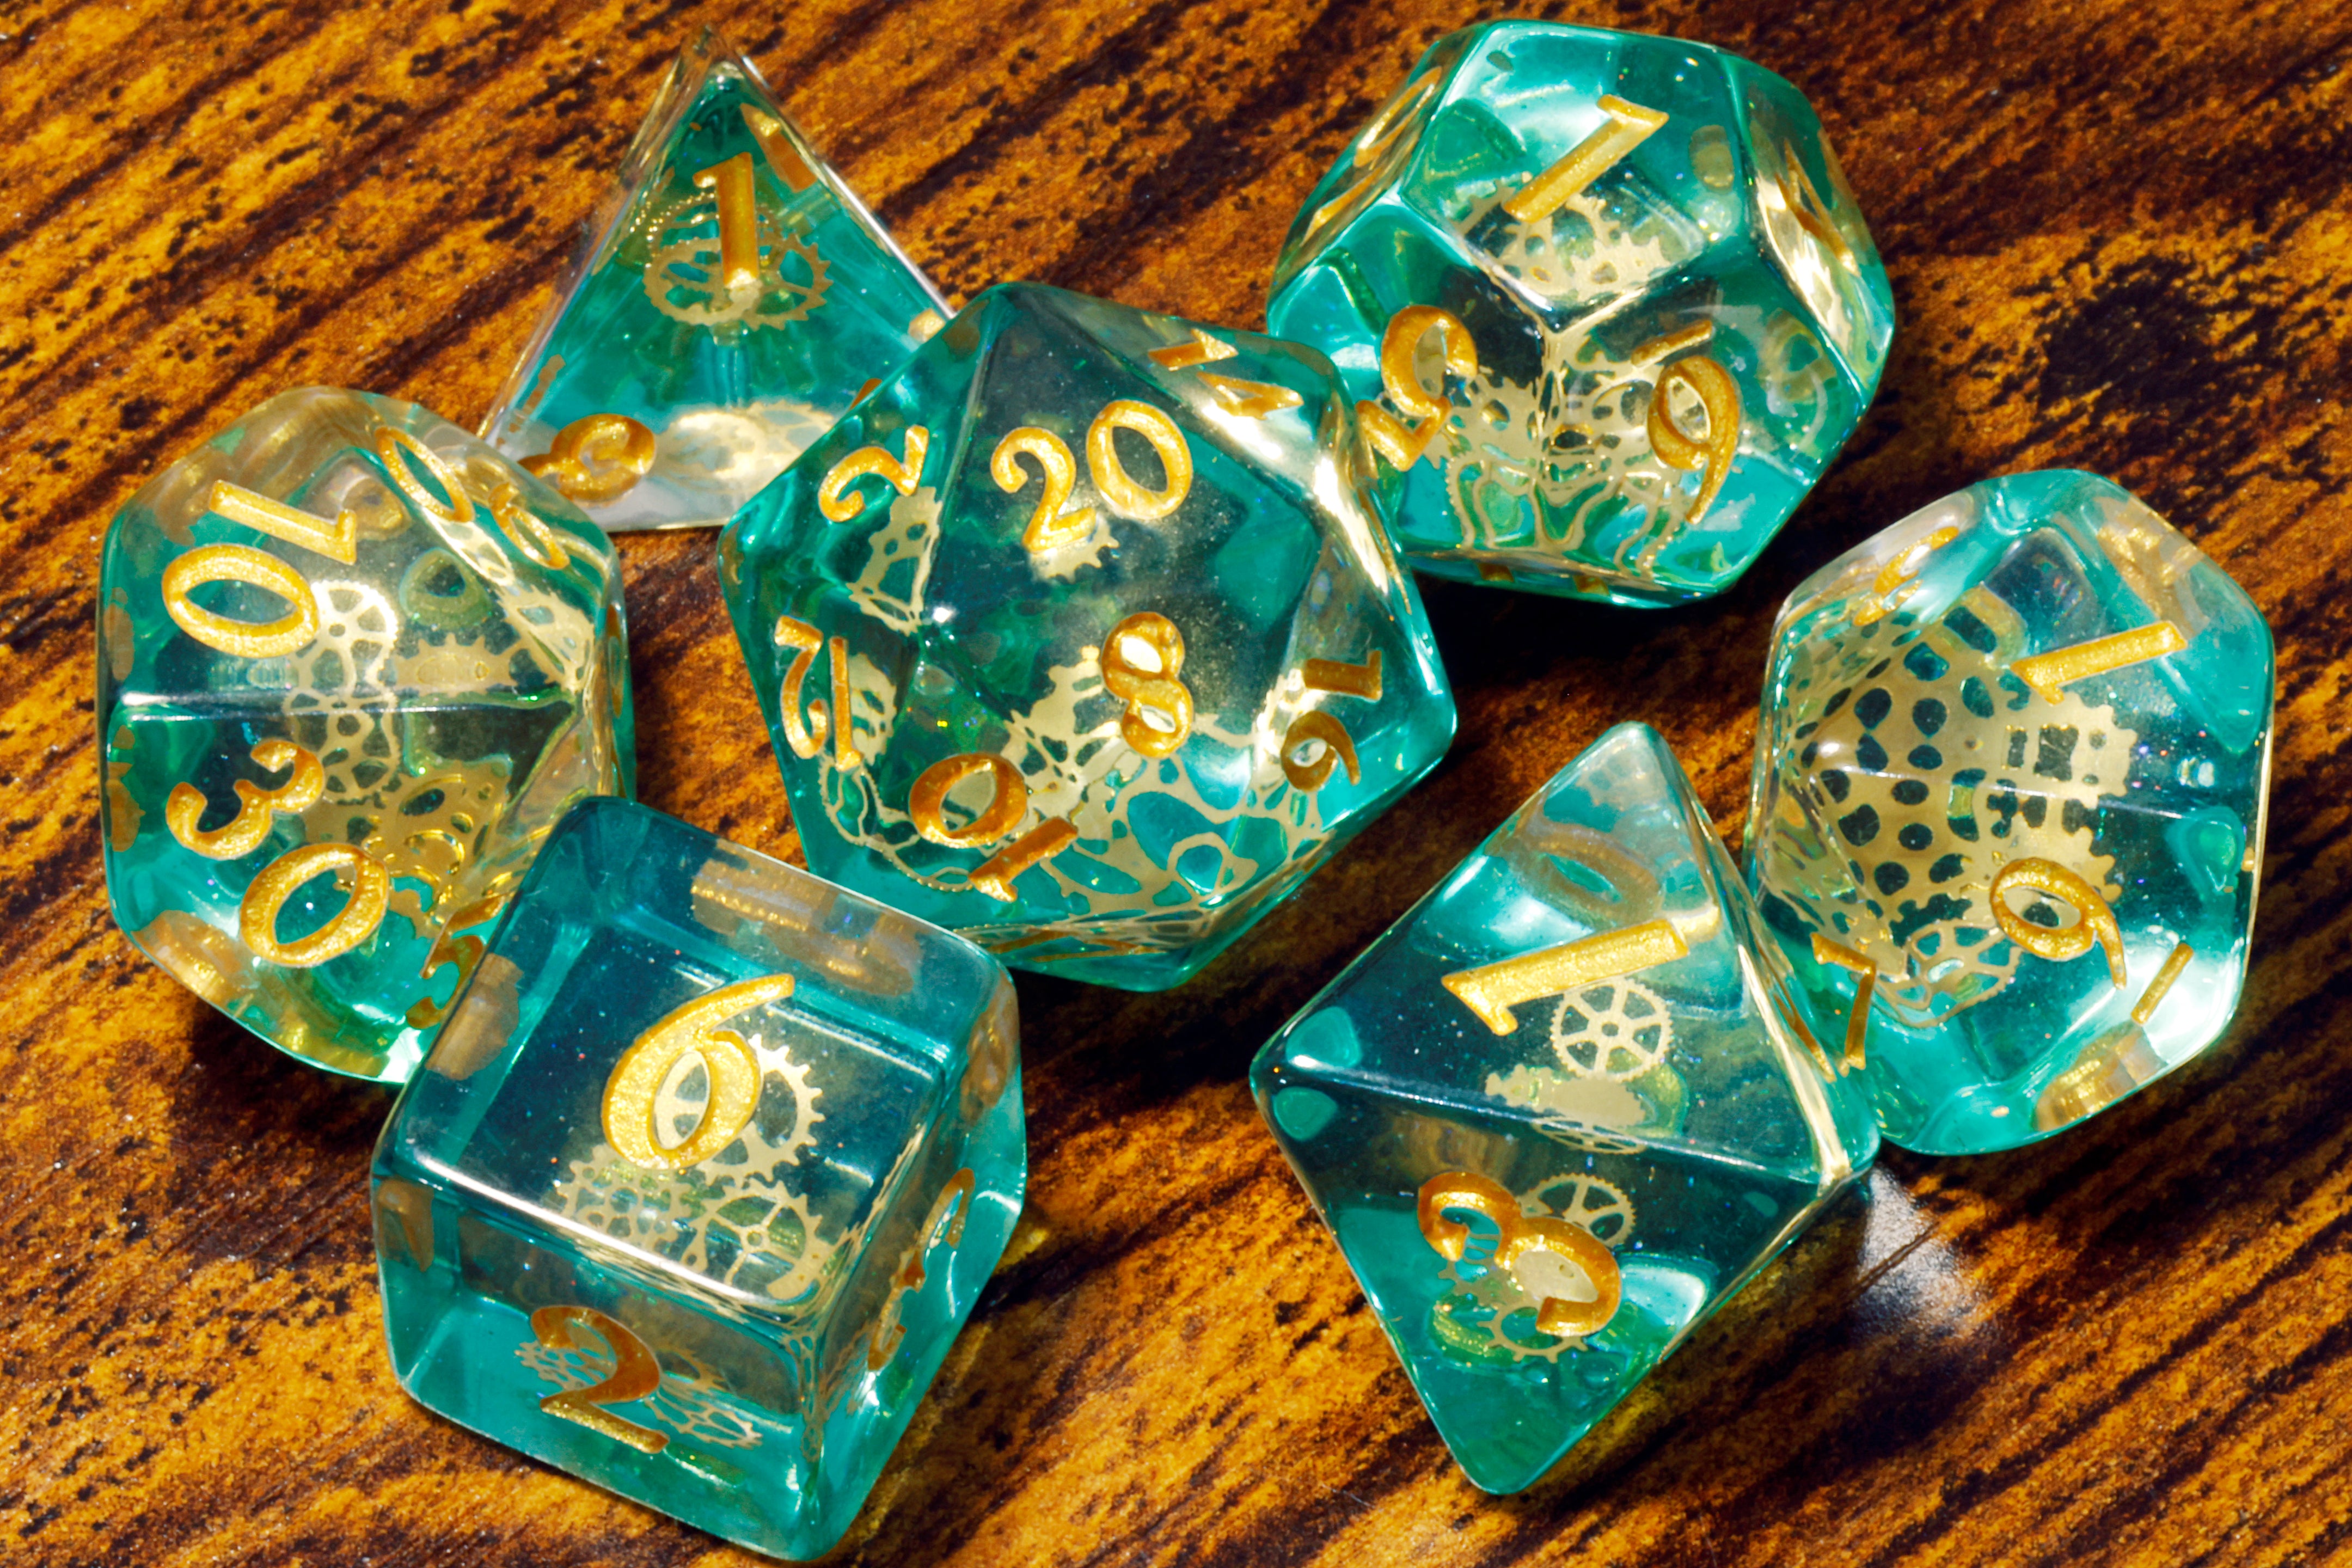 a group of green dices sitting on top of a wooden table